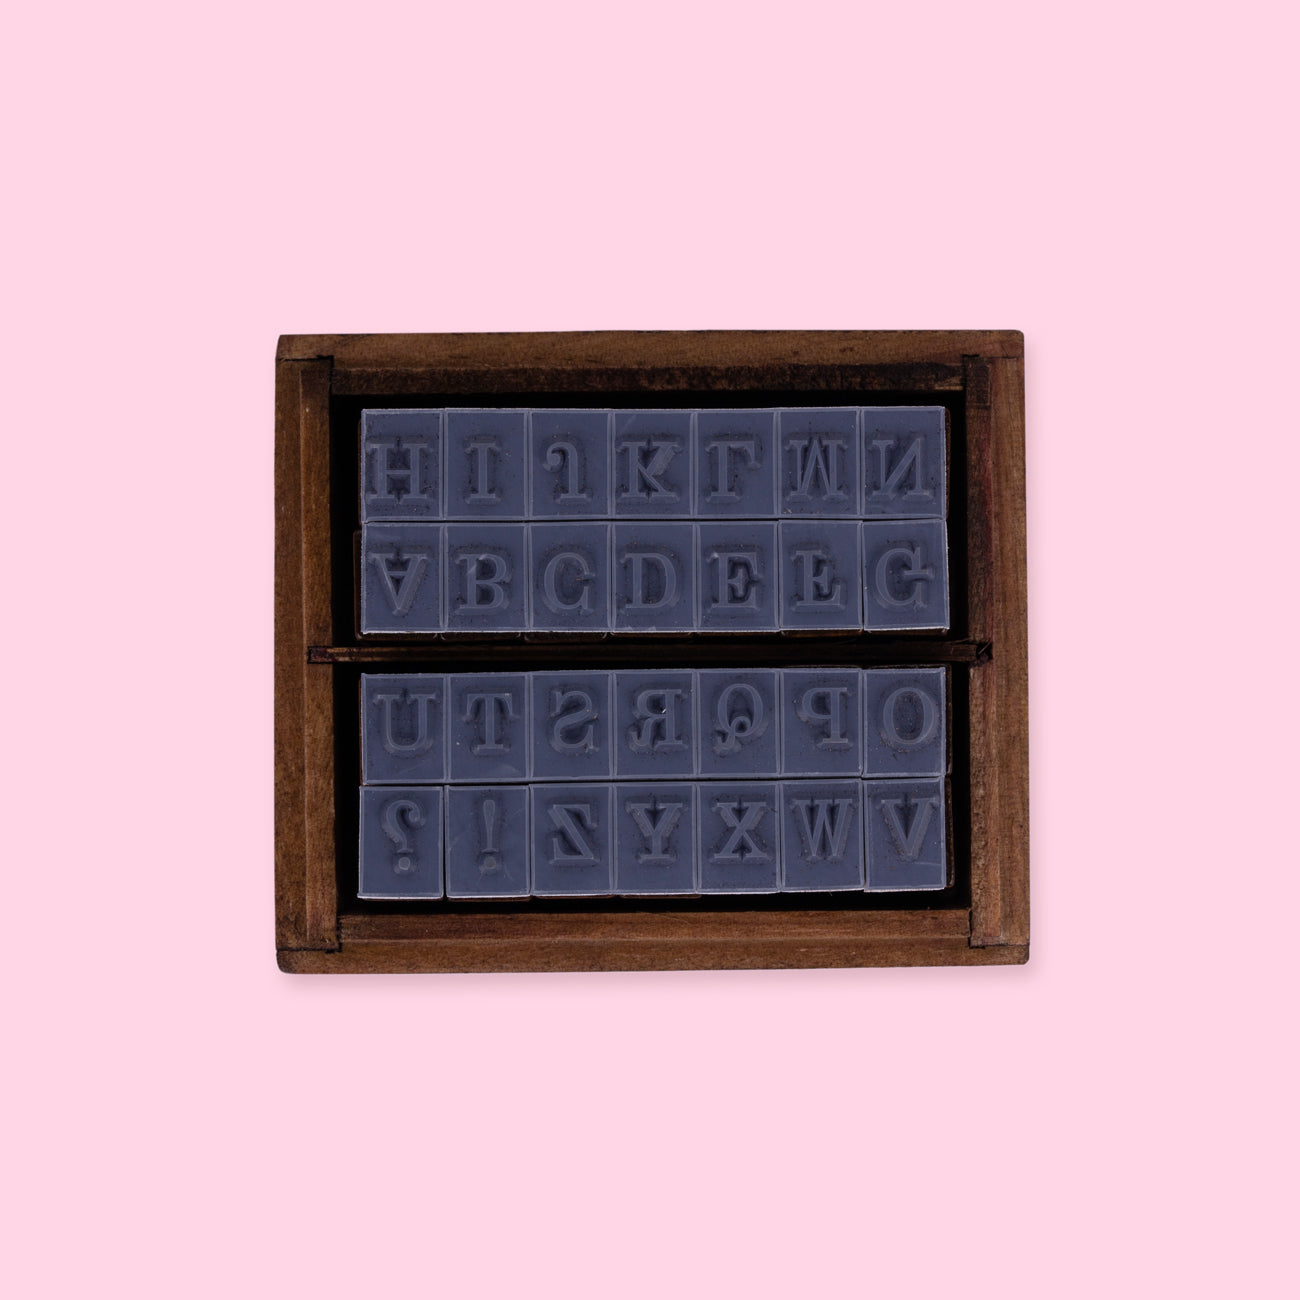 English Alphabet And Number Wood Stamp - Upper Case Letters